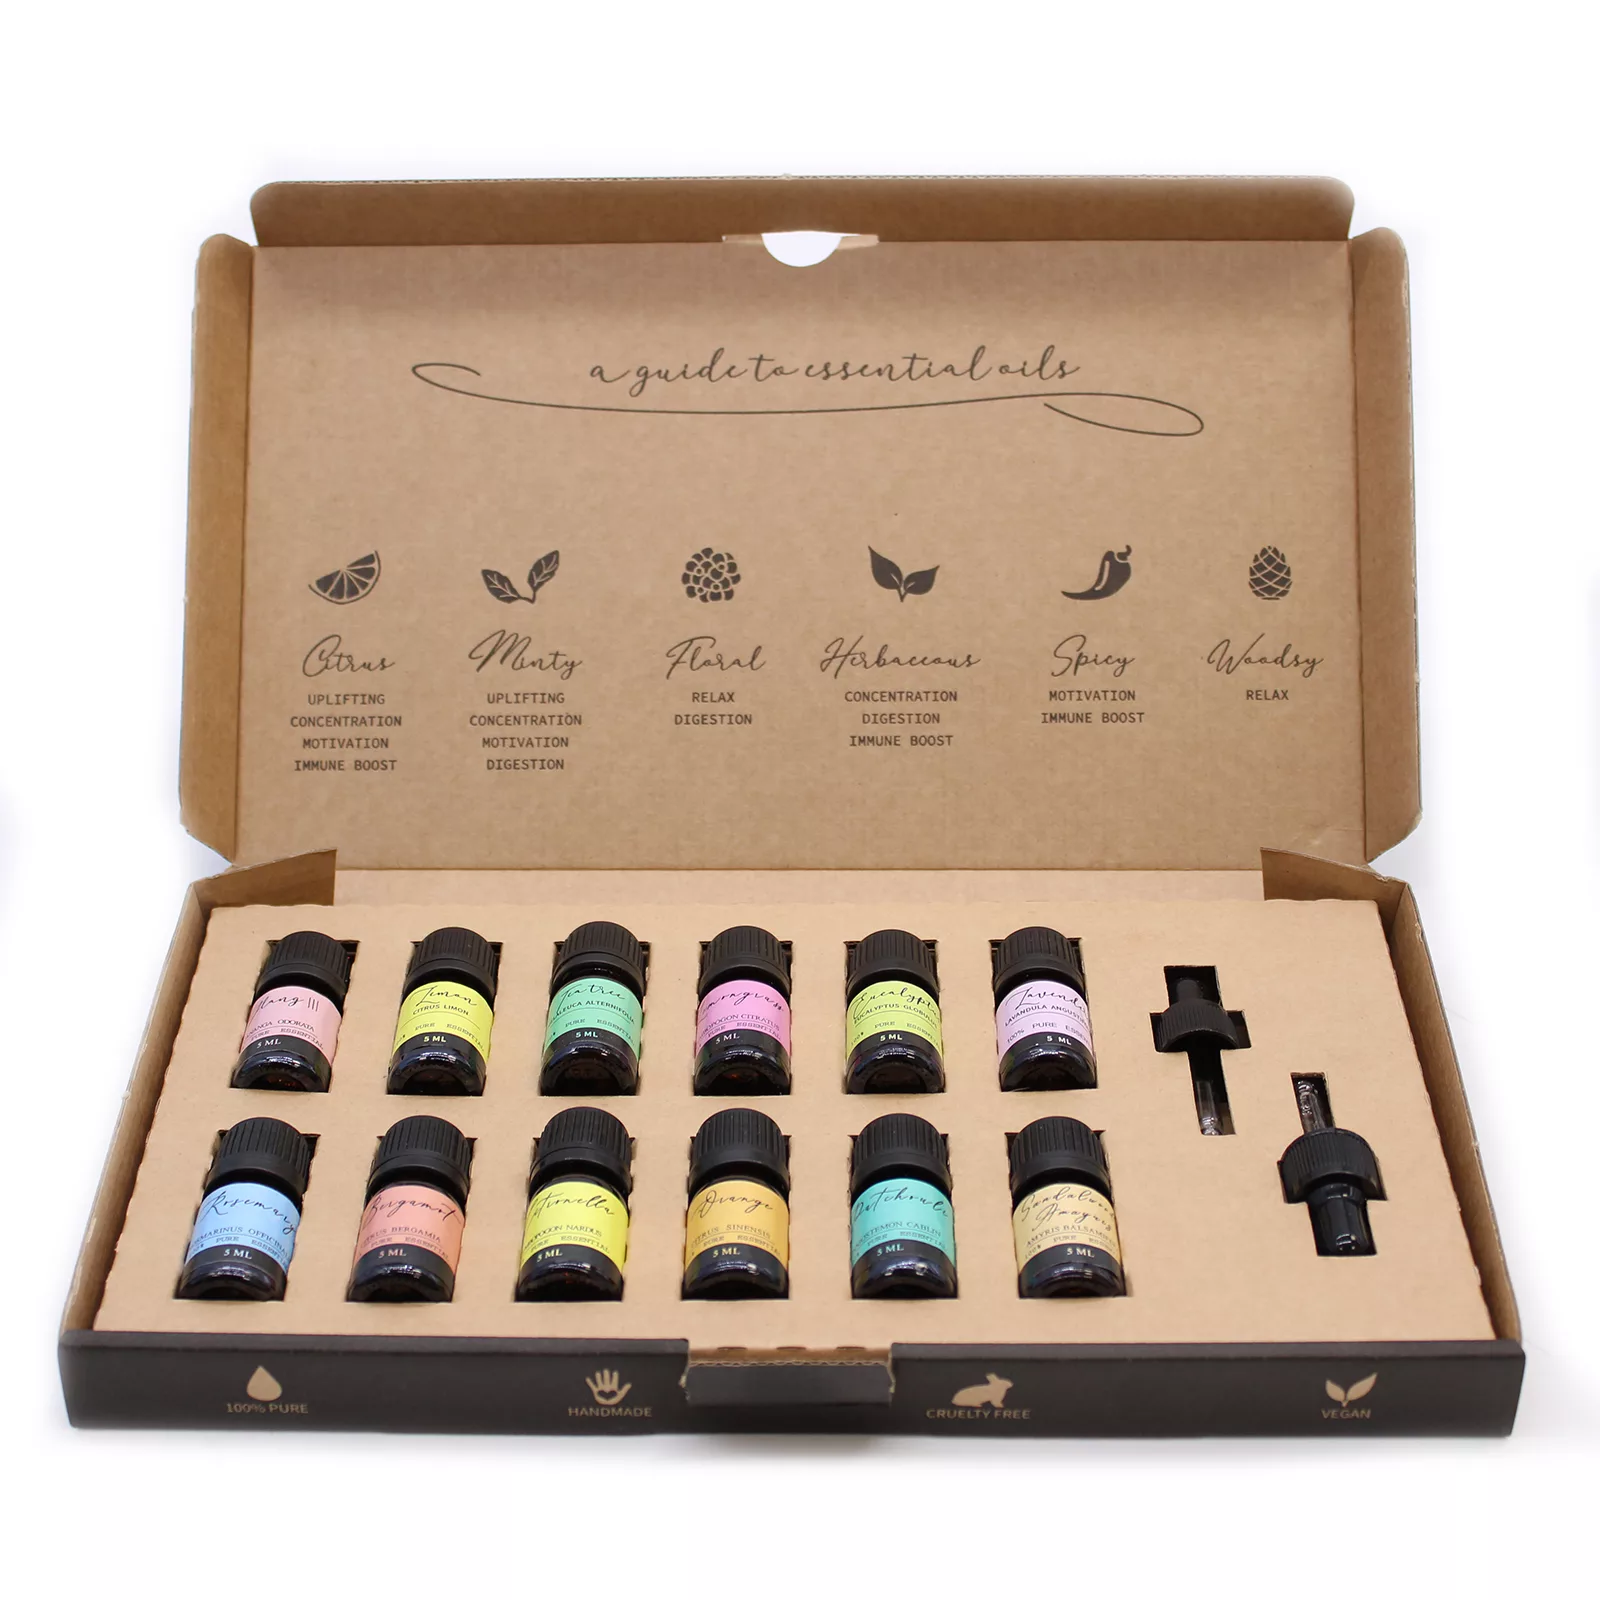 Aromatherapy Essential Oil Set – The Top 12